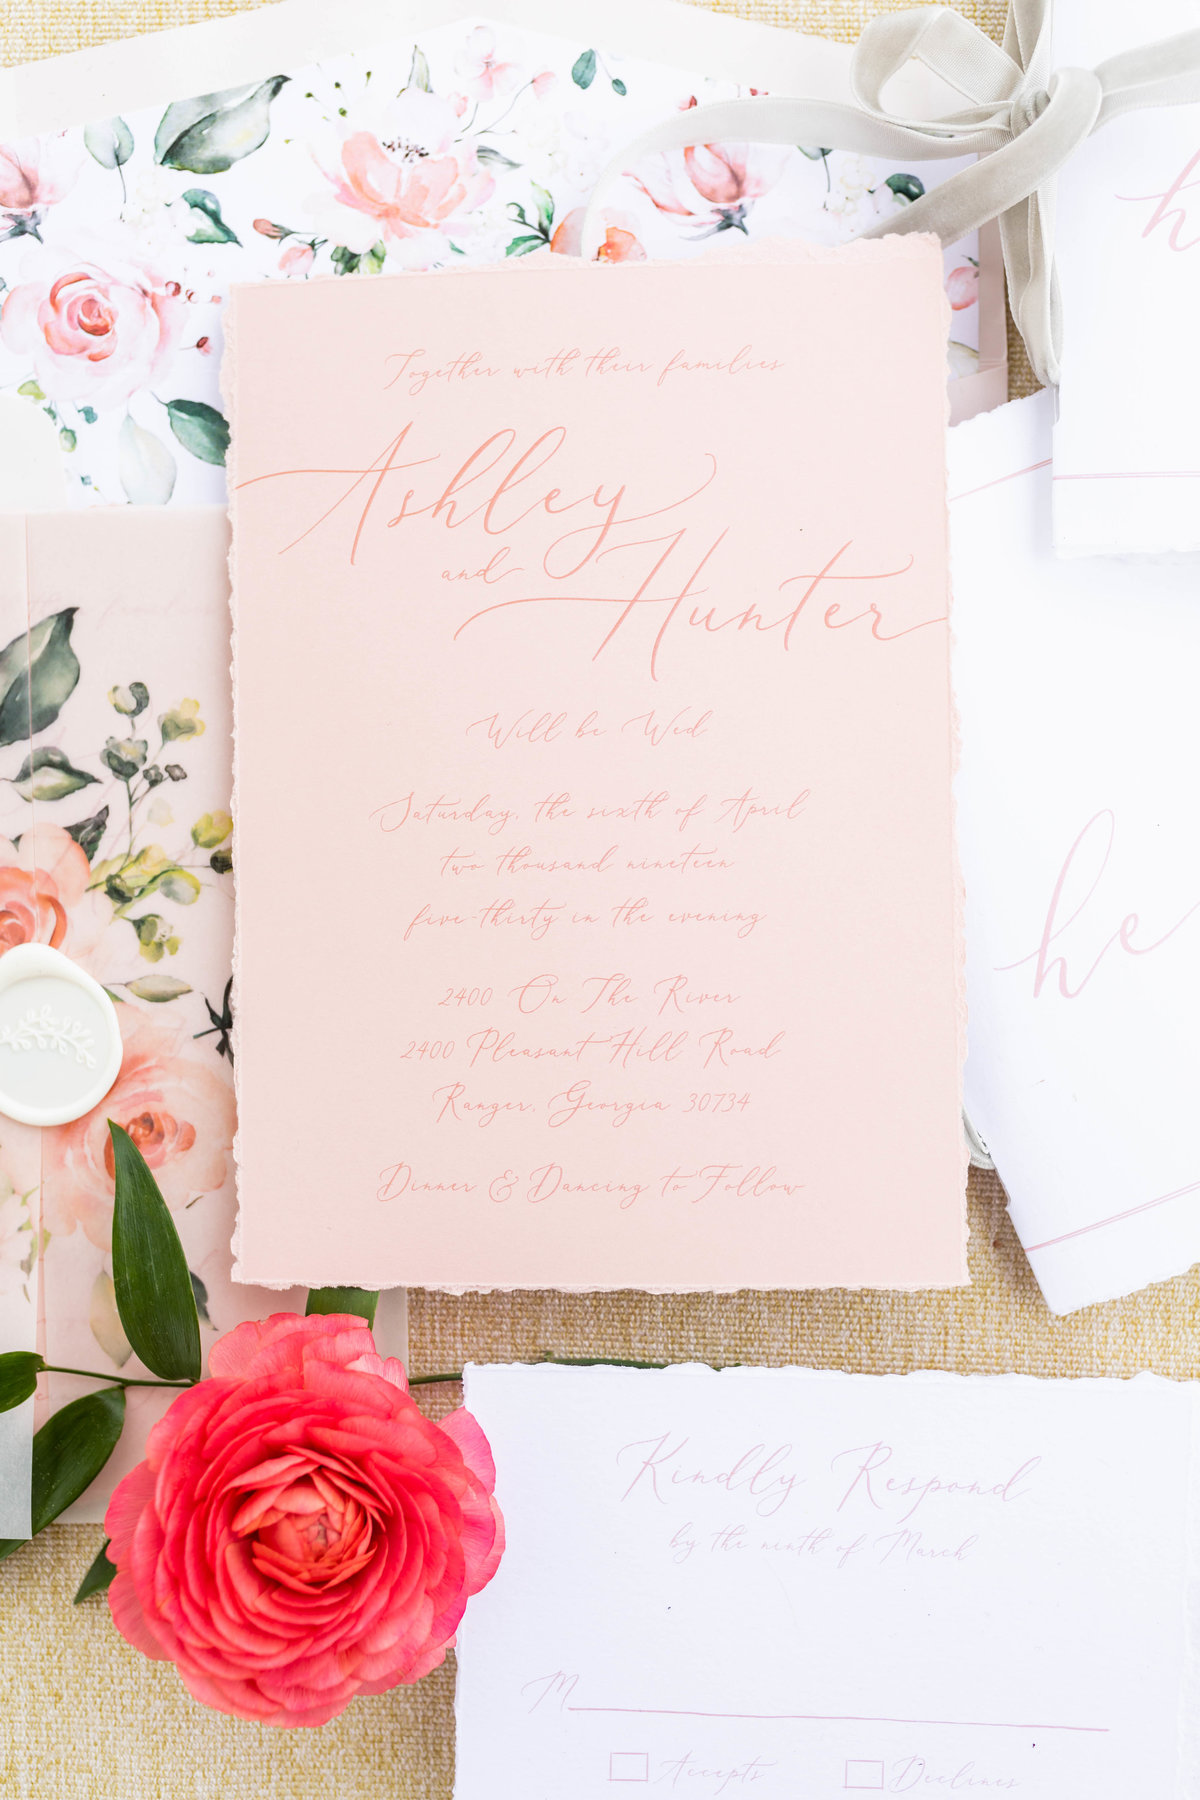 WEDDING INVITE PINK AND BLUSH AND IVORY